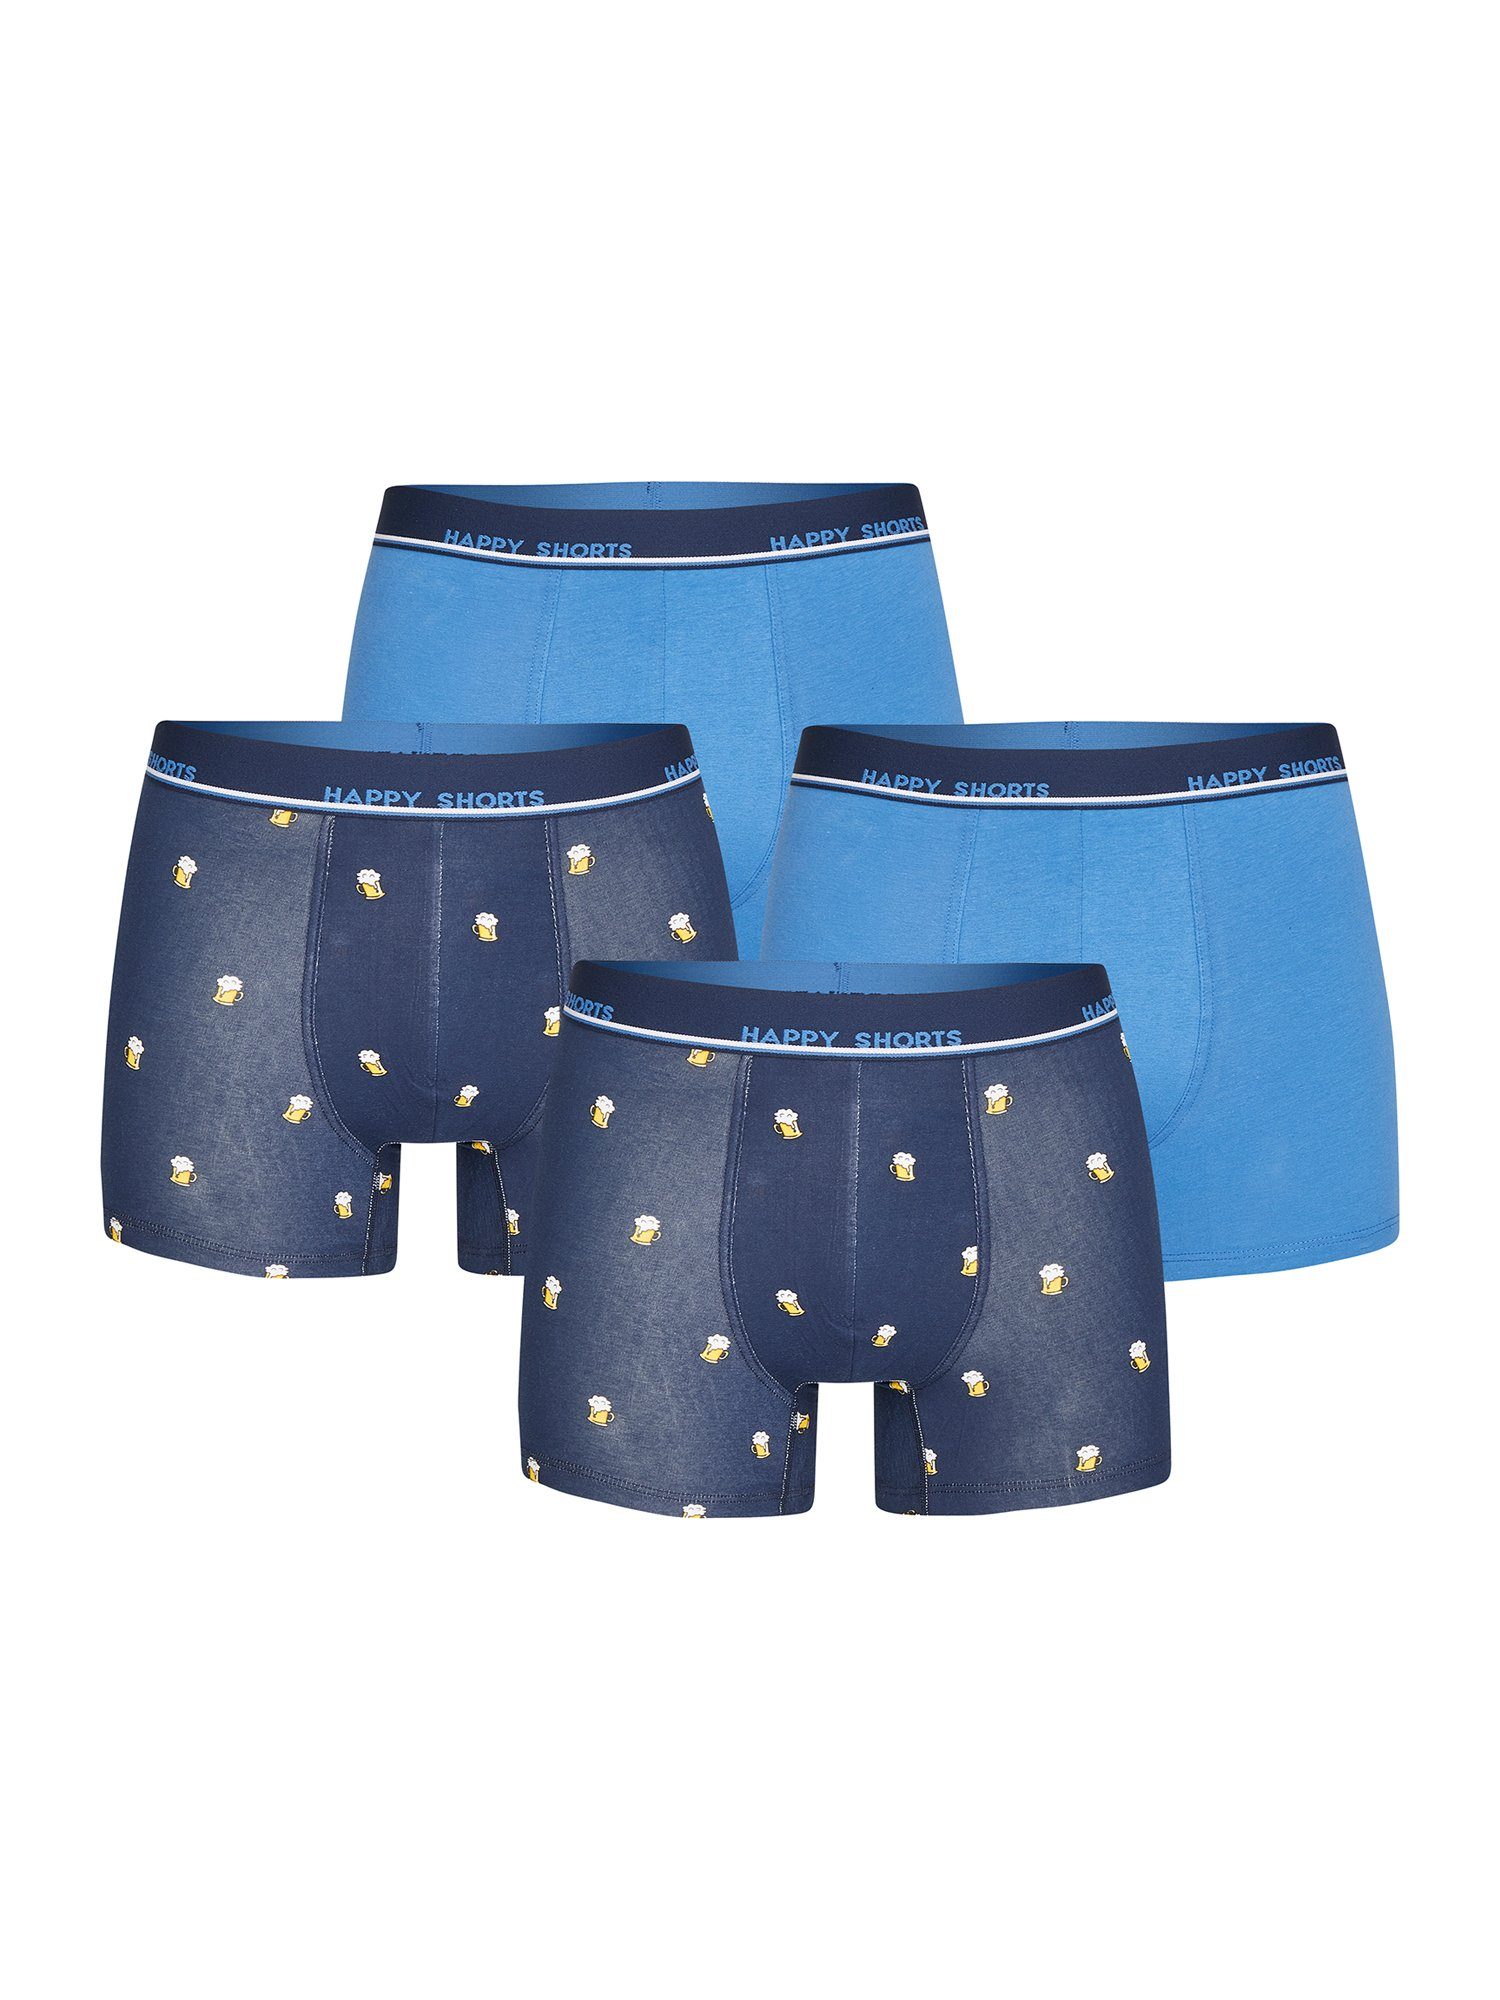 HAPPY SHORTS Boxer Beer (4-St)